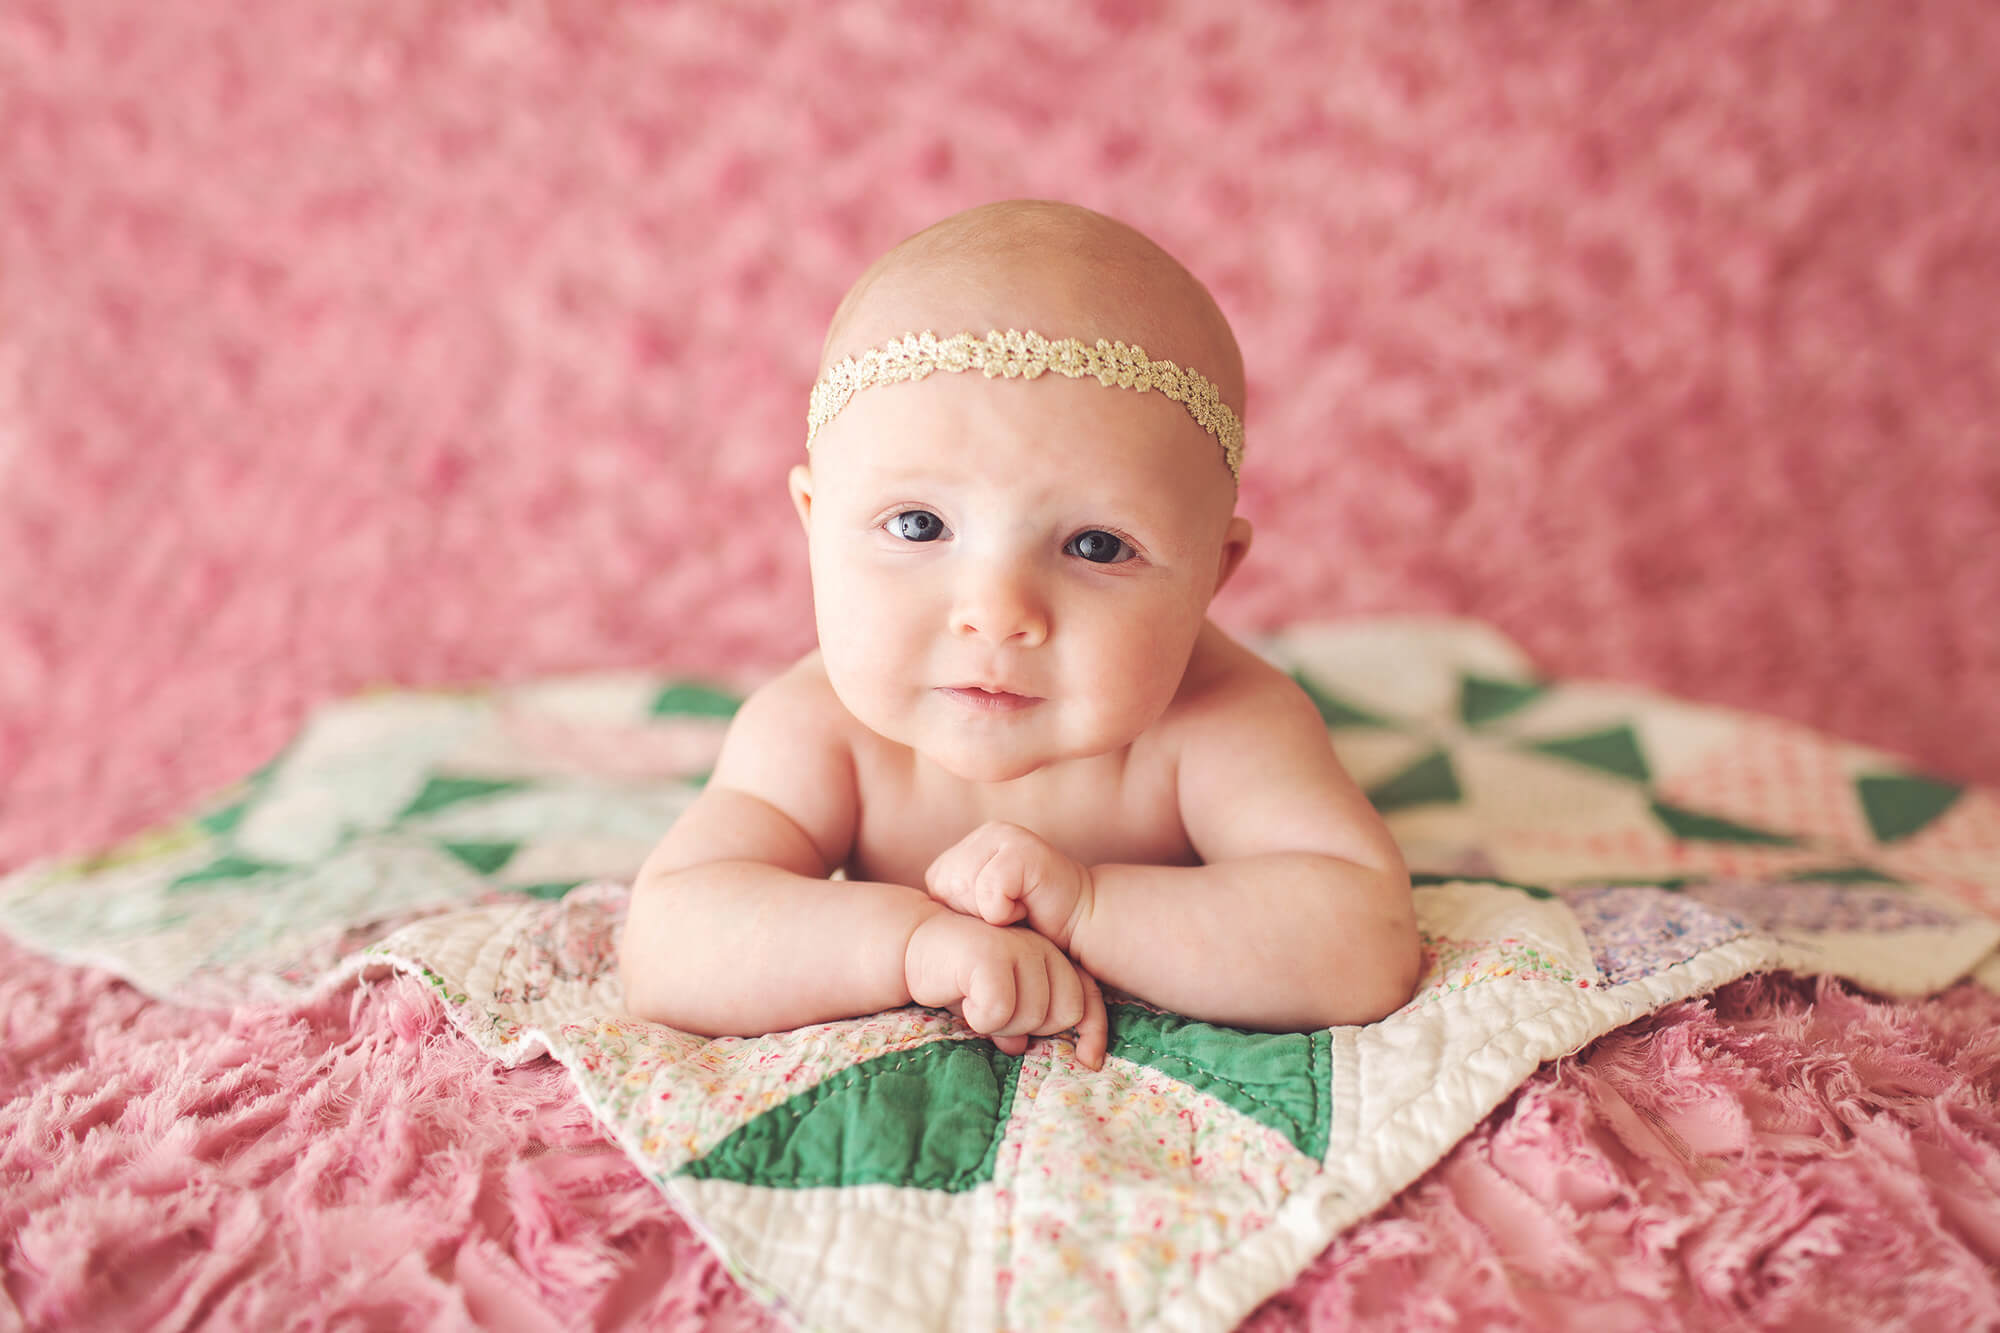 Three-month old baby girl on a pastel quilt with a golden headband